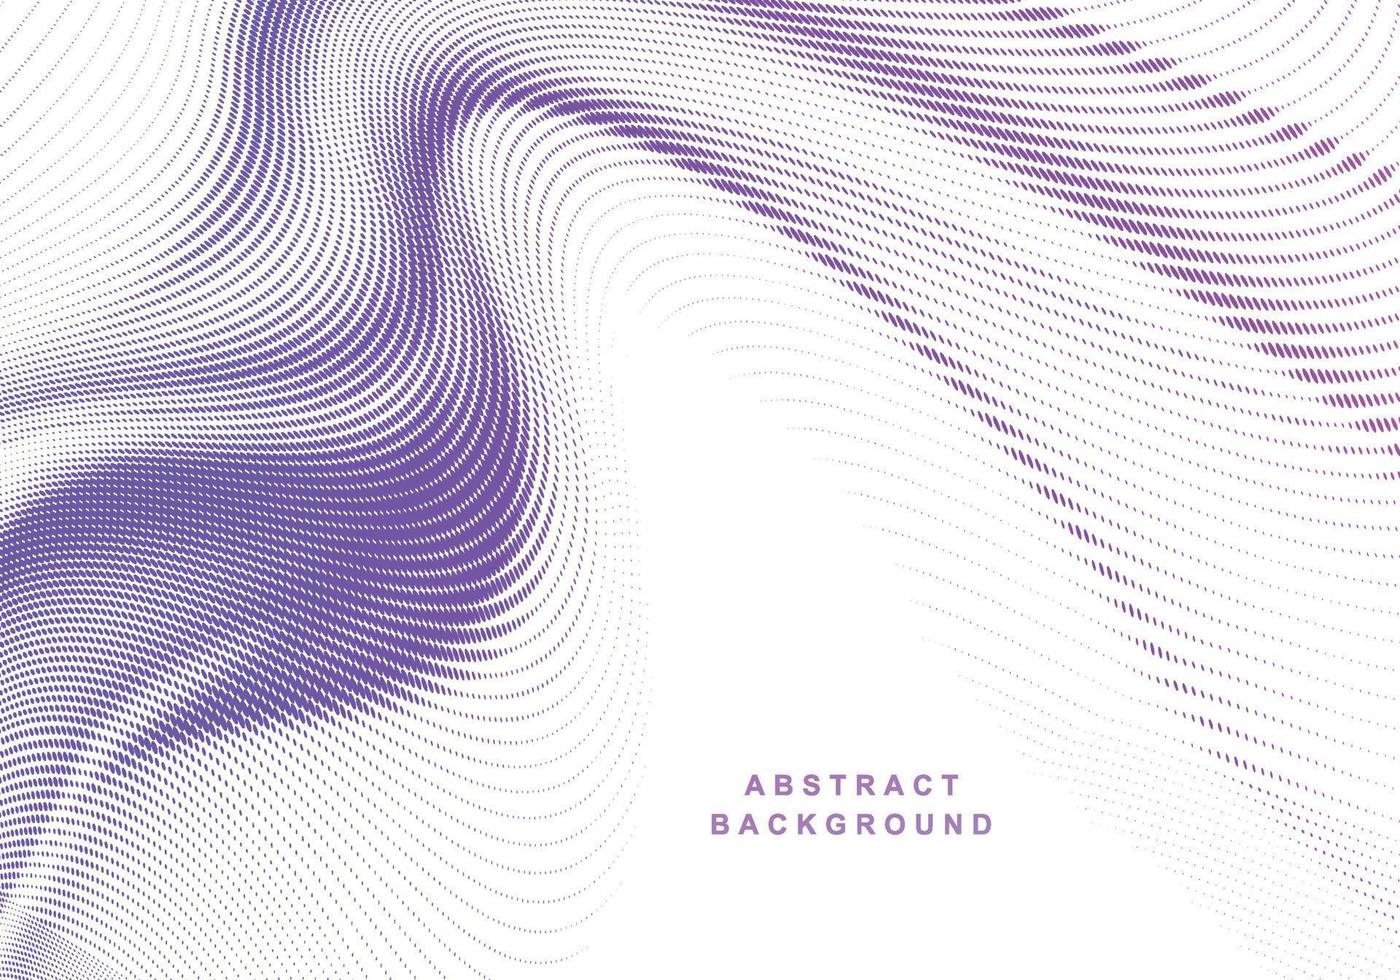 Abstract purple dotted particles flowing wave background vector